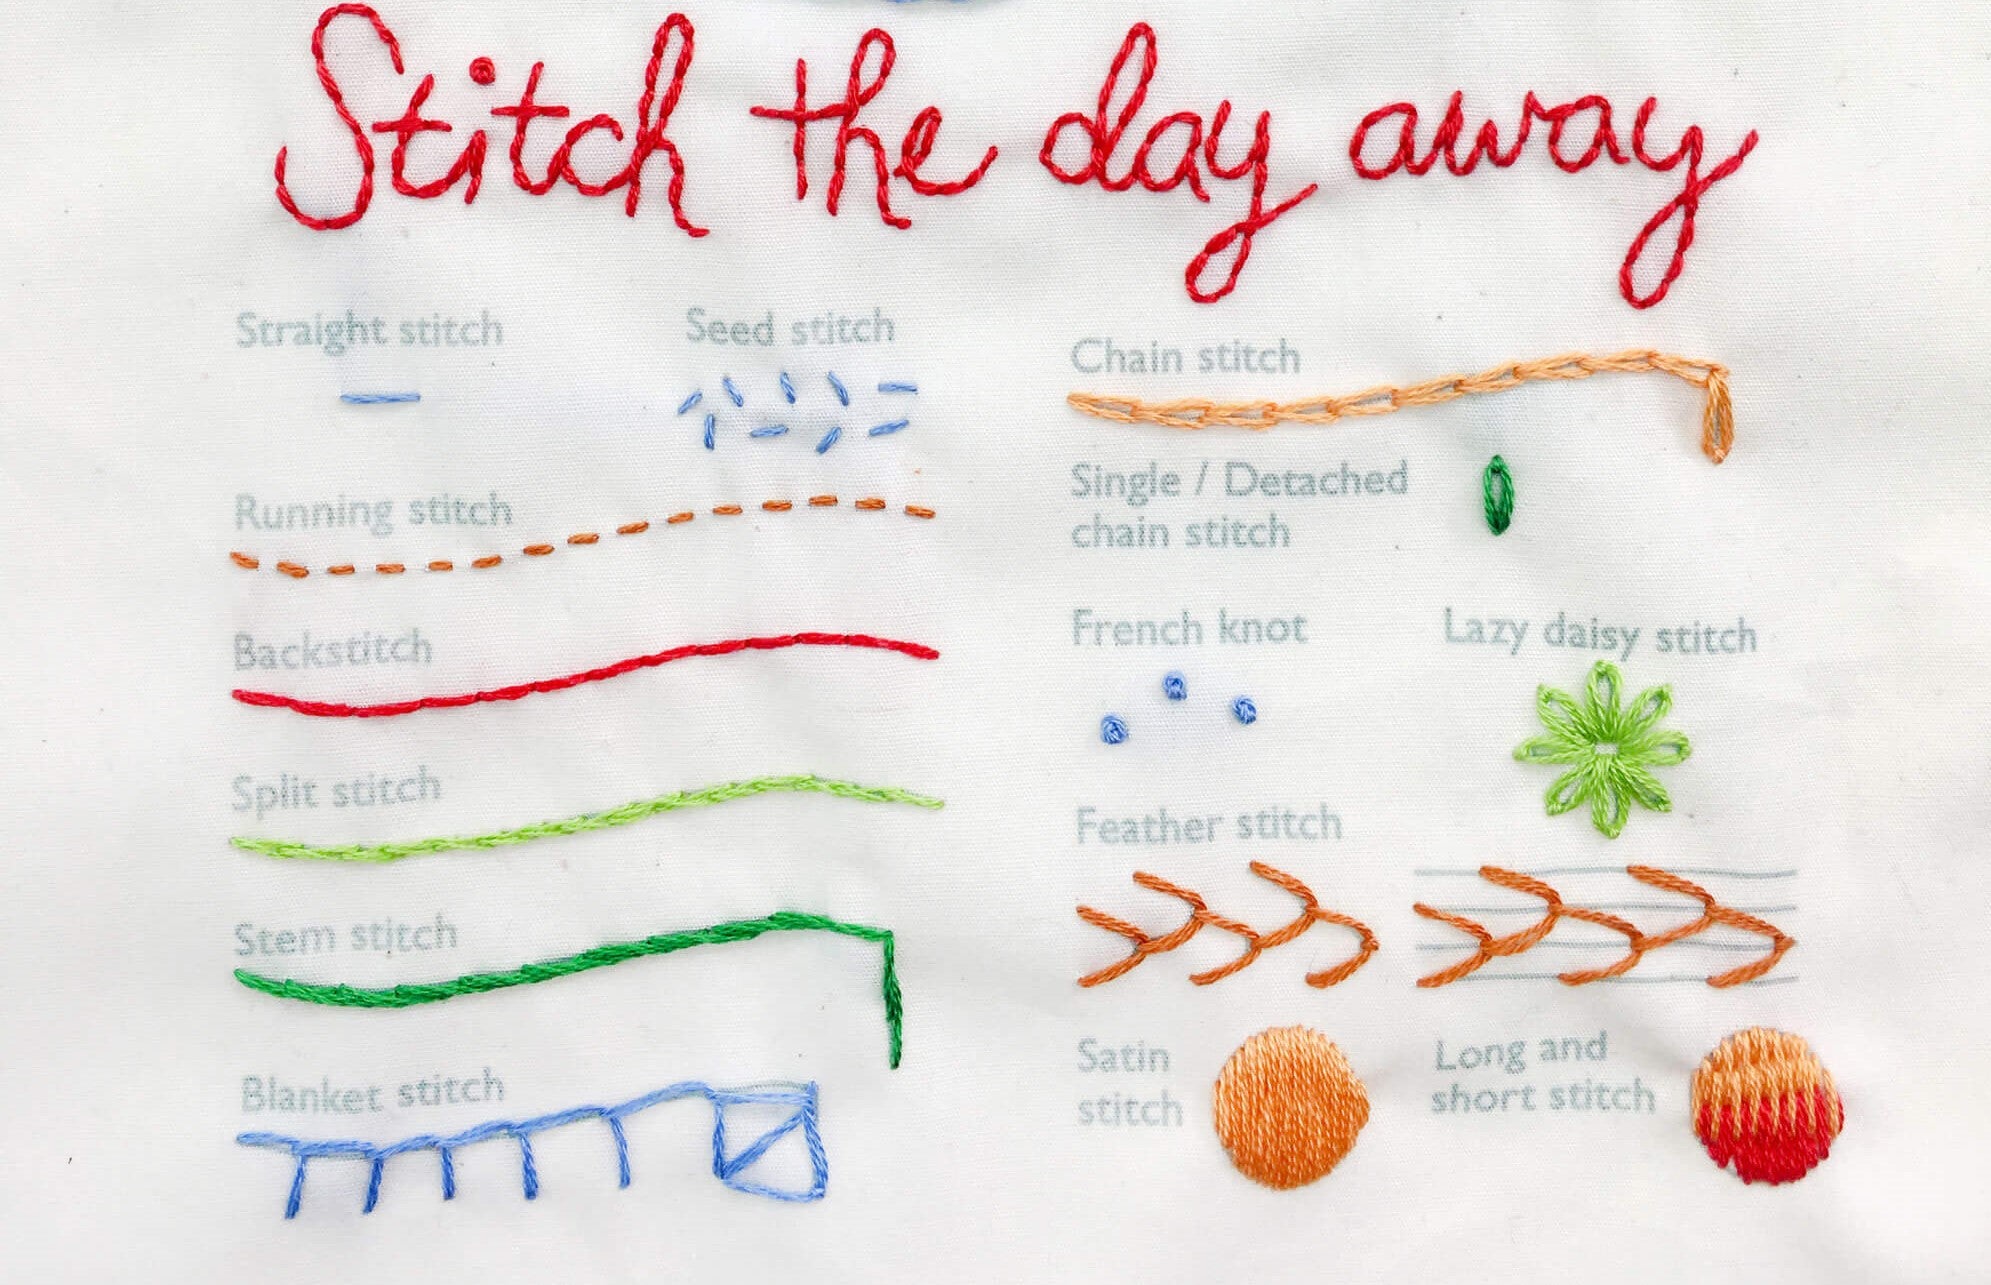 Embroidery Stitch Library - learn basic embroidery stitches